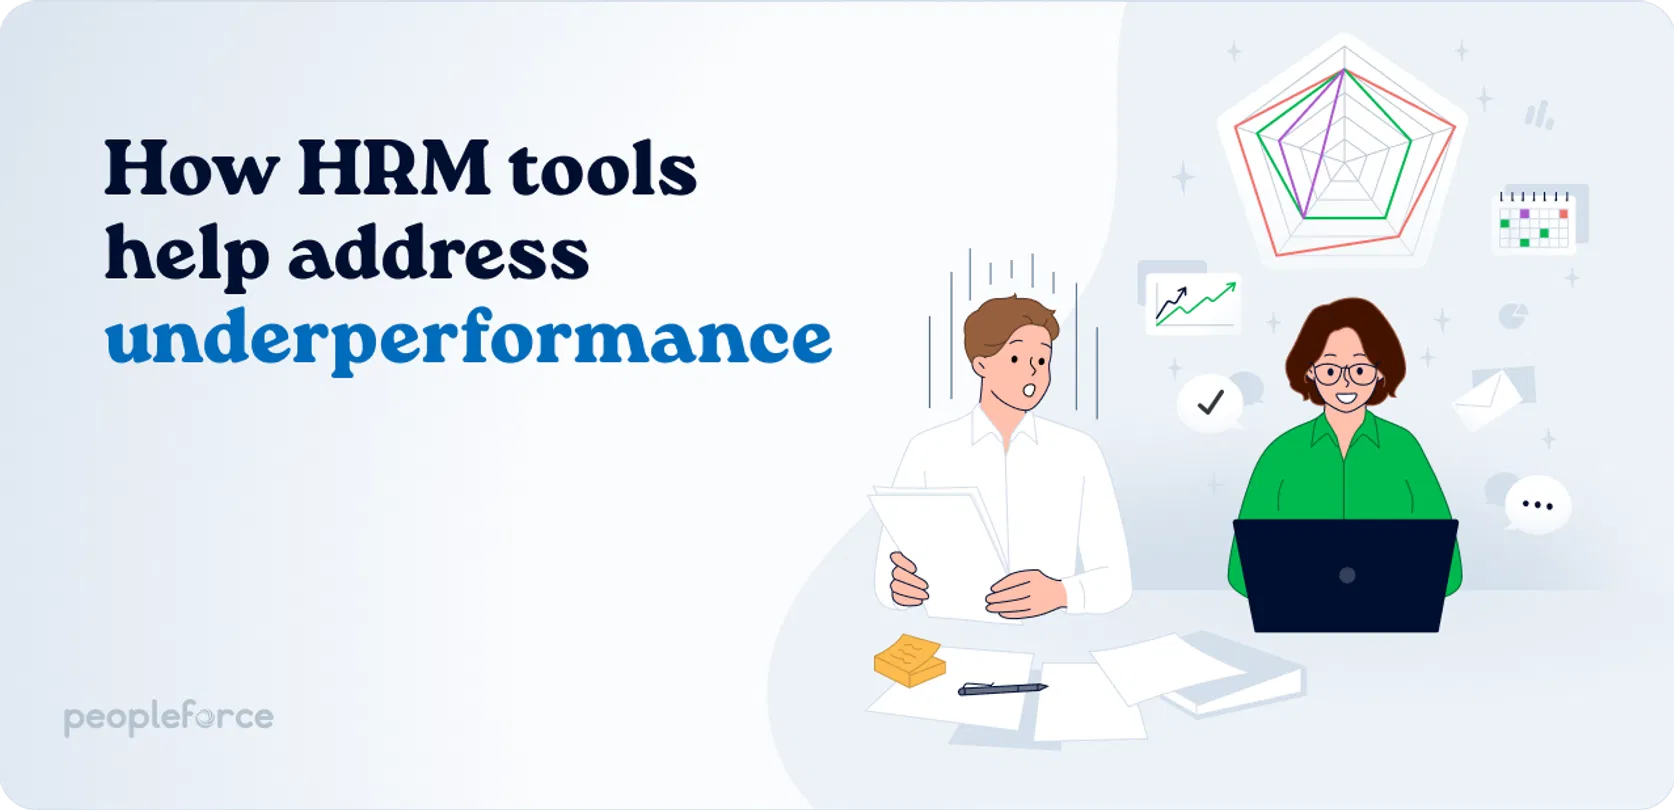 How HRM tools help address underperformance